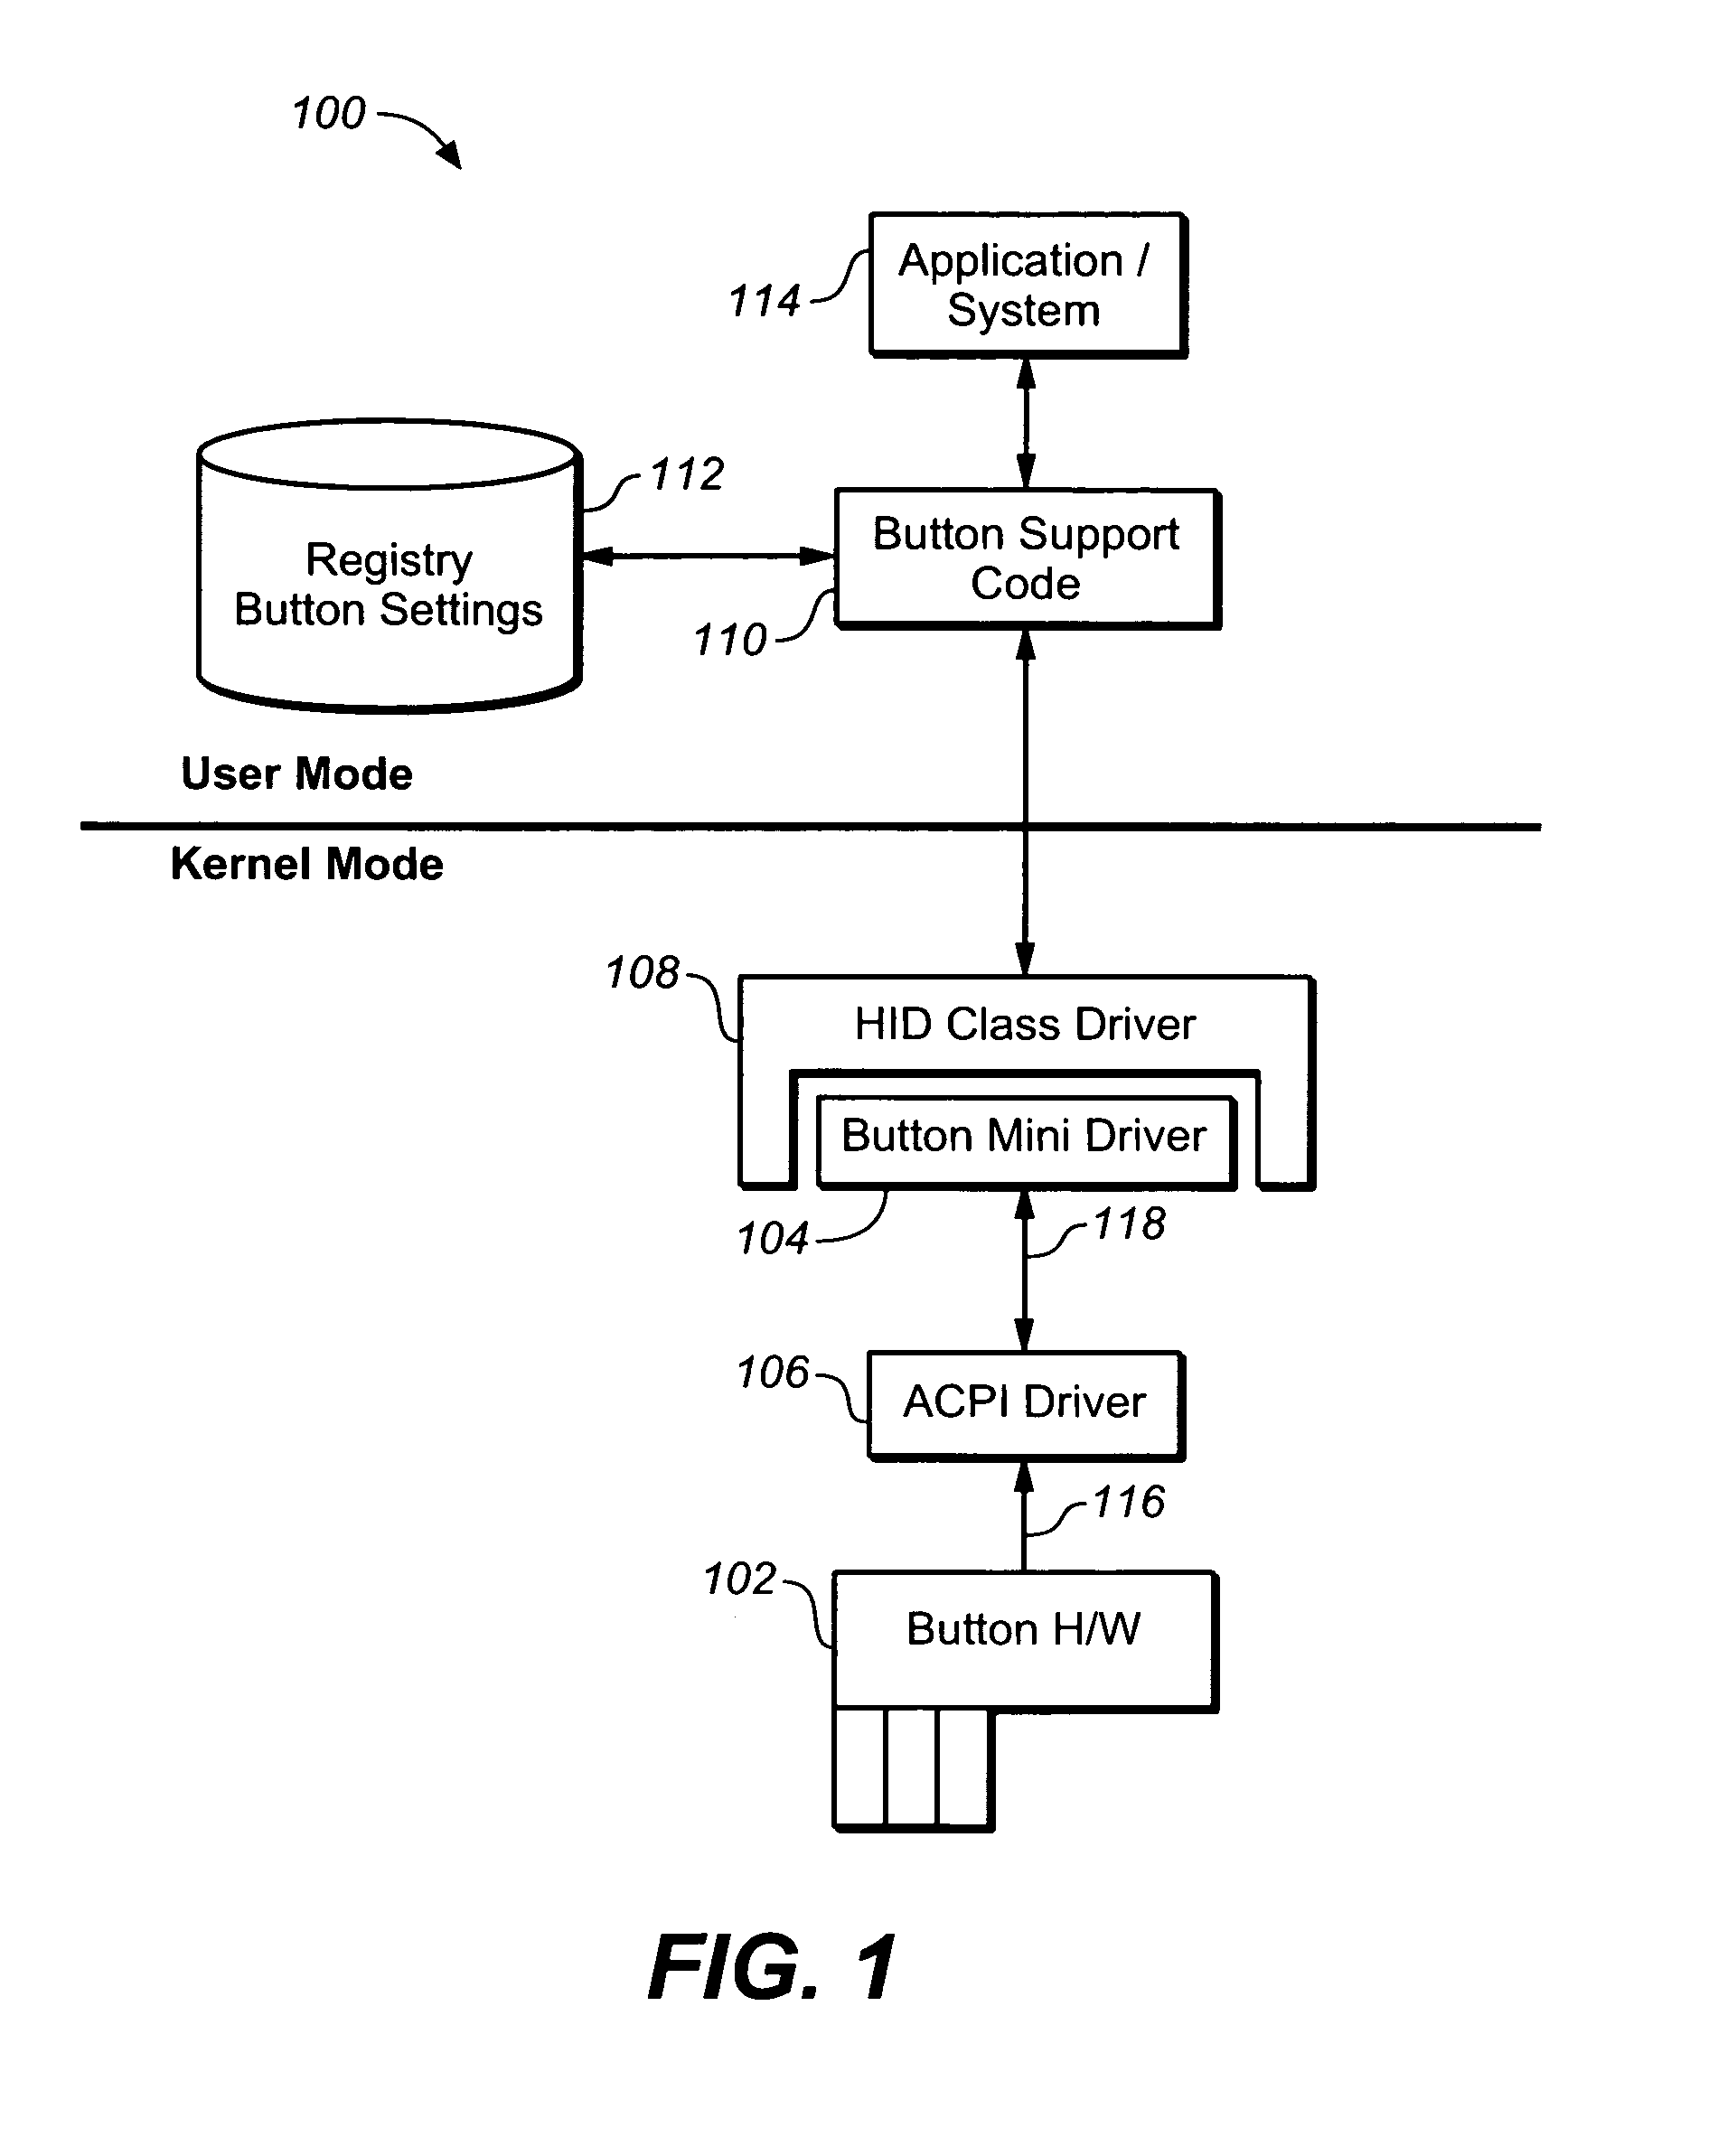 System for processing programmable buttons using system interrupts